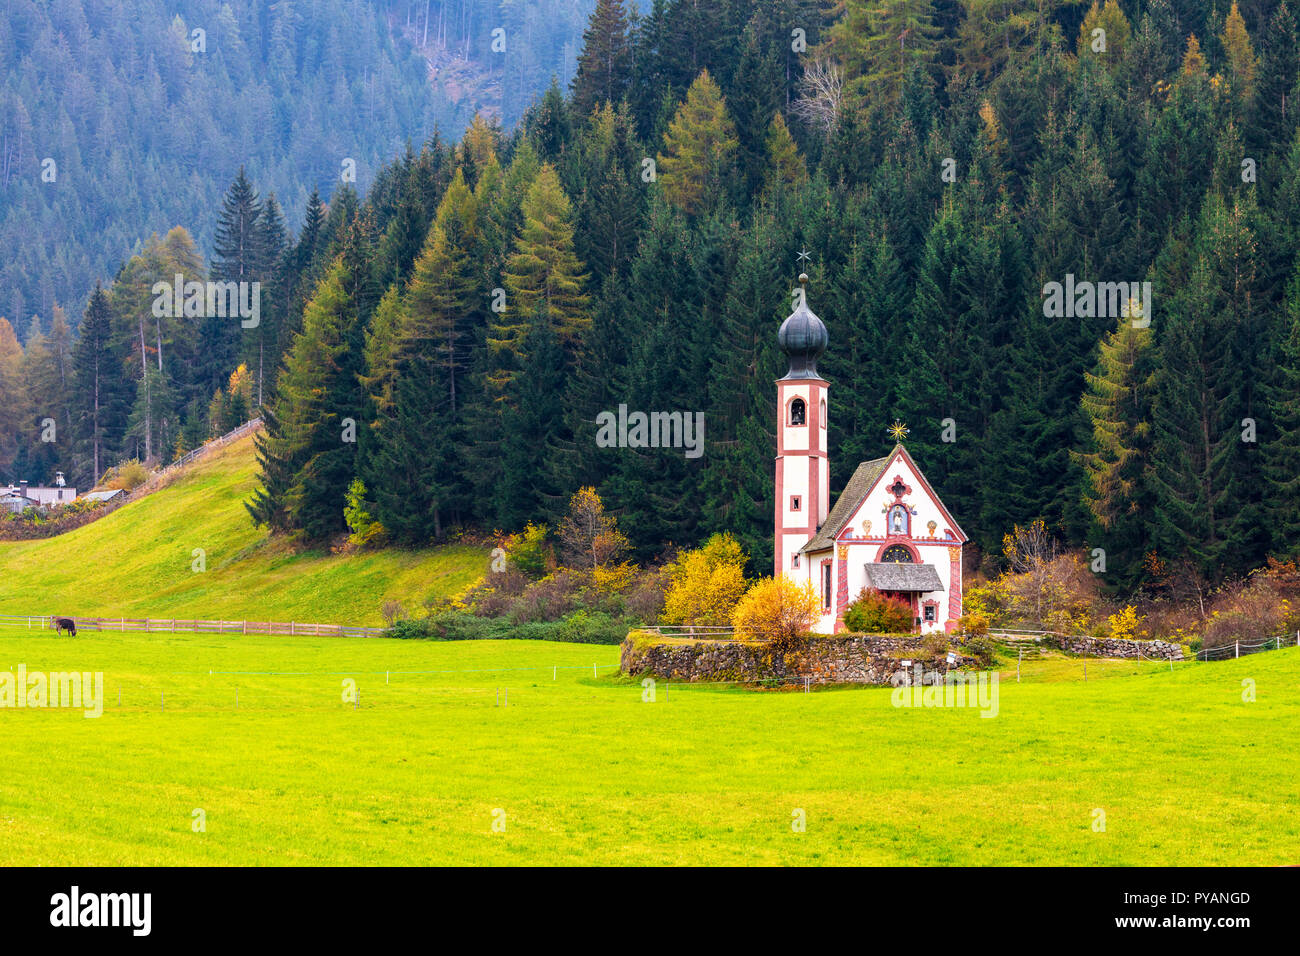 Small church located in a meadow with high mountain peaks behind Stock Photo